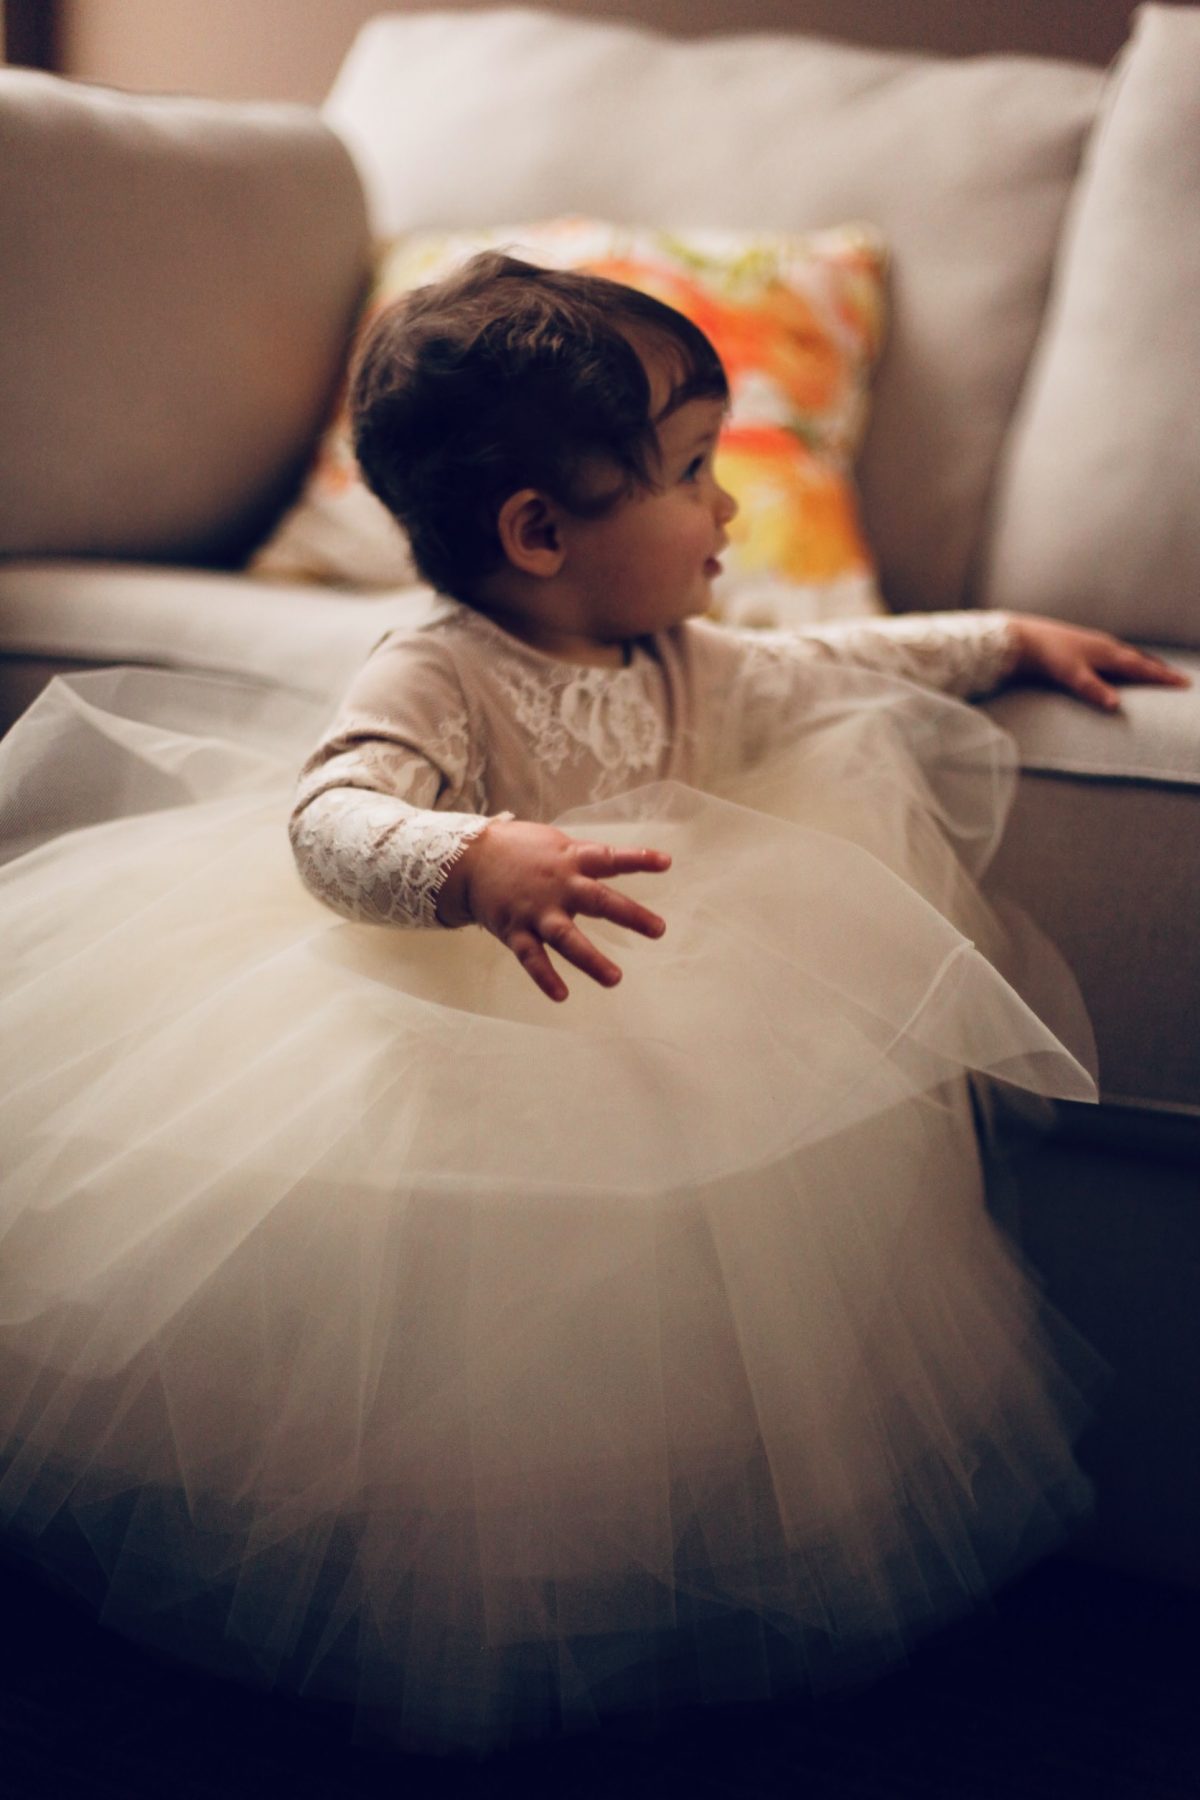 Custom Lace Flower Girl and Communion Dresses – A N A G R A S S I A